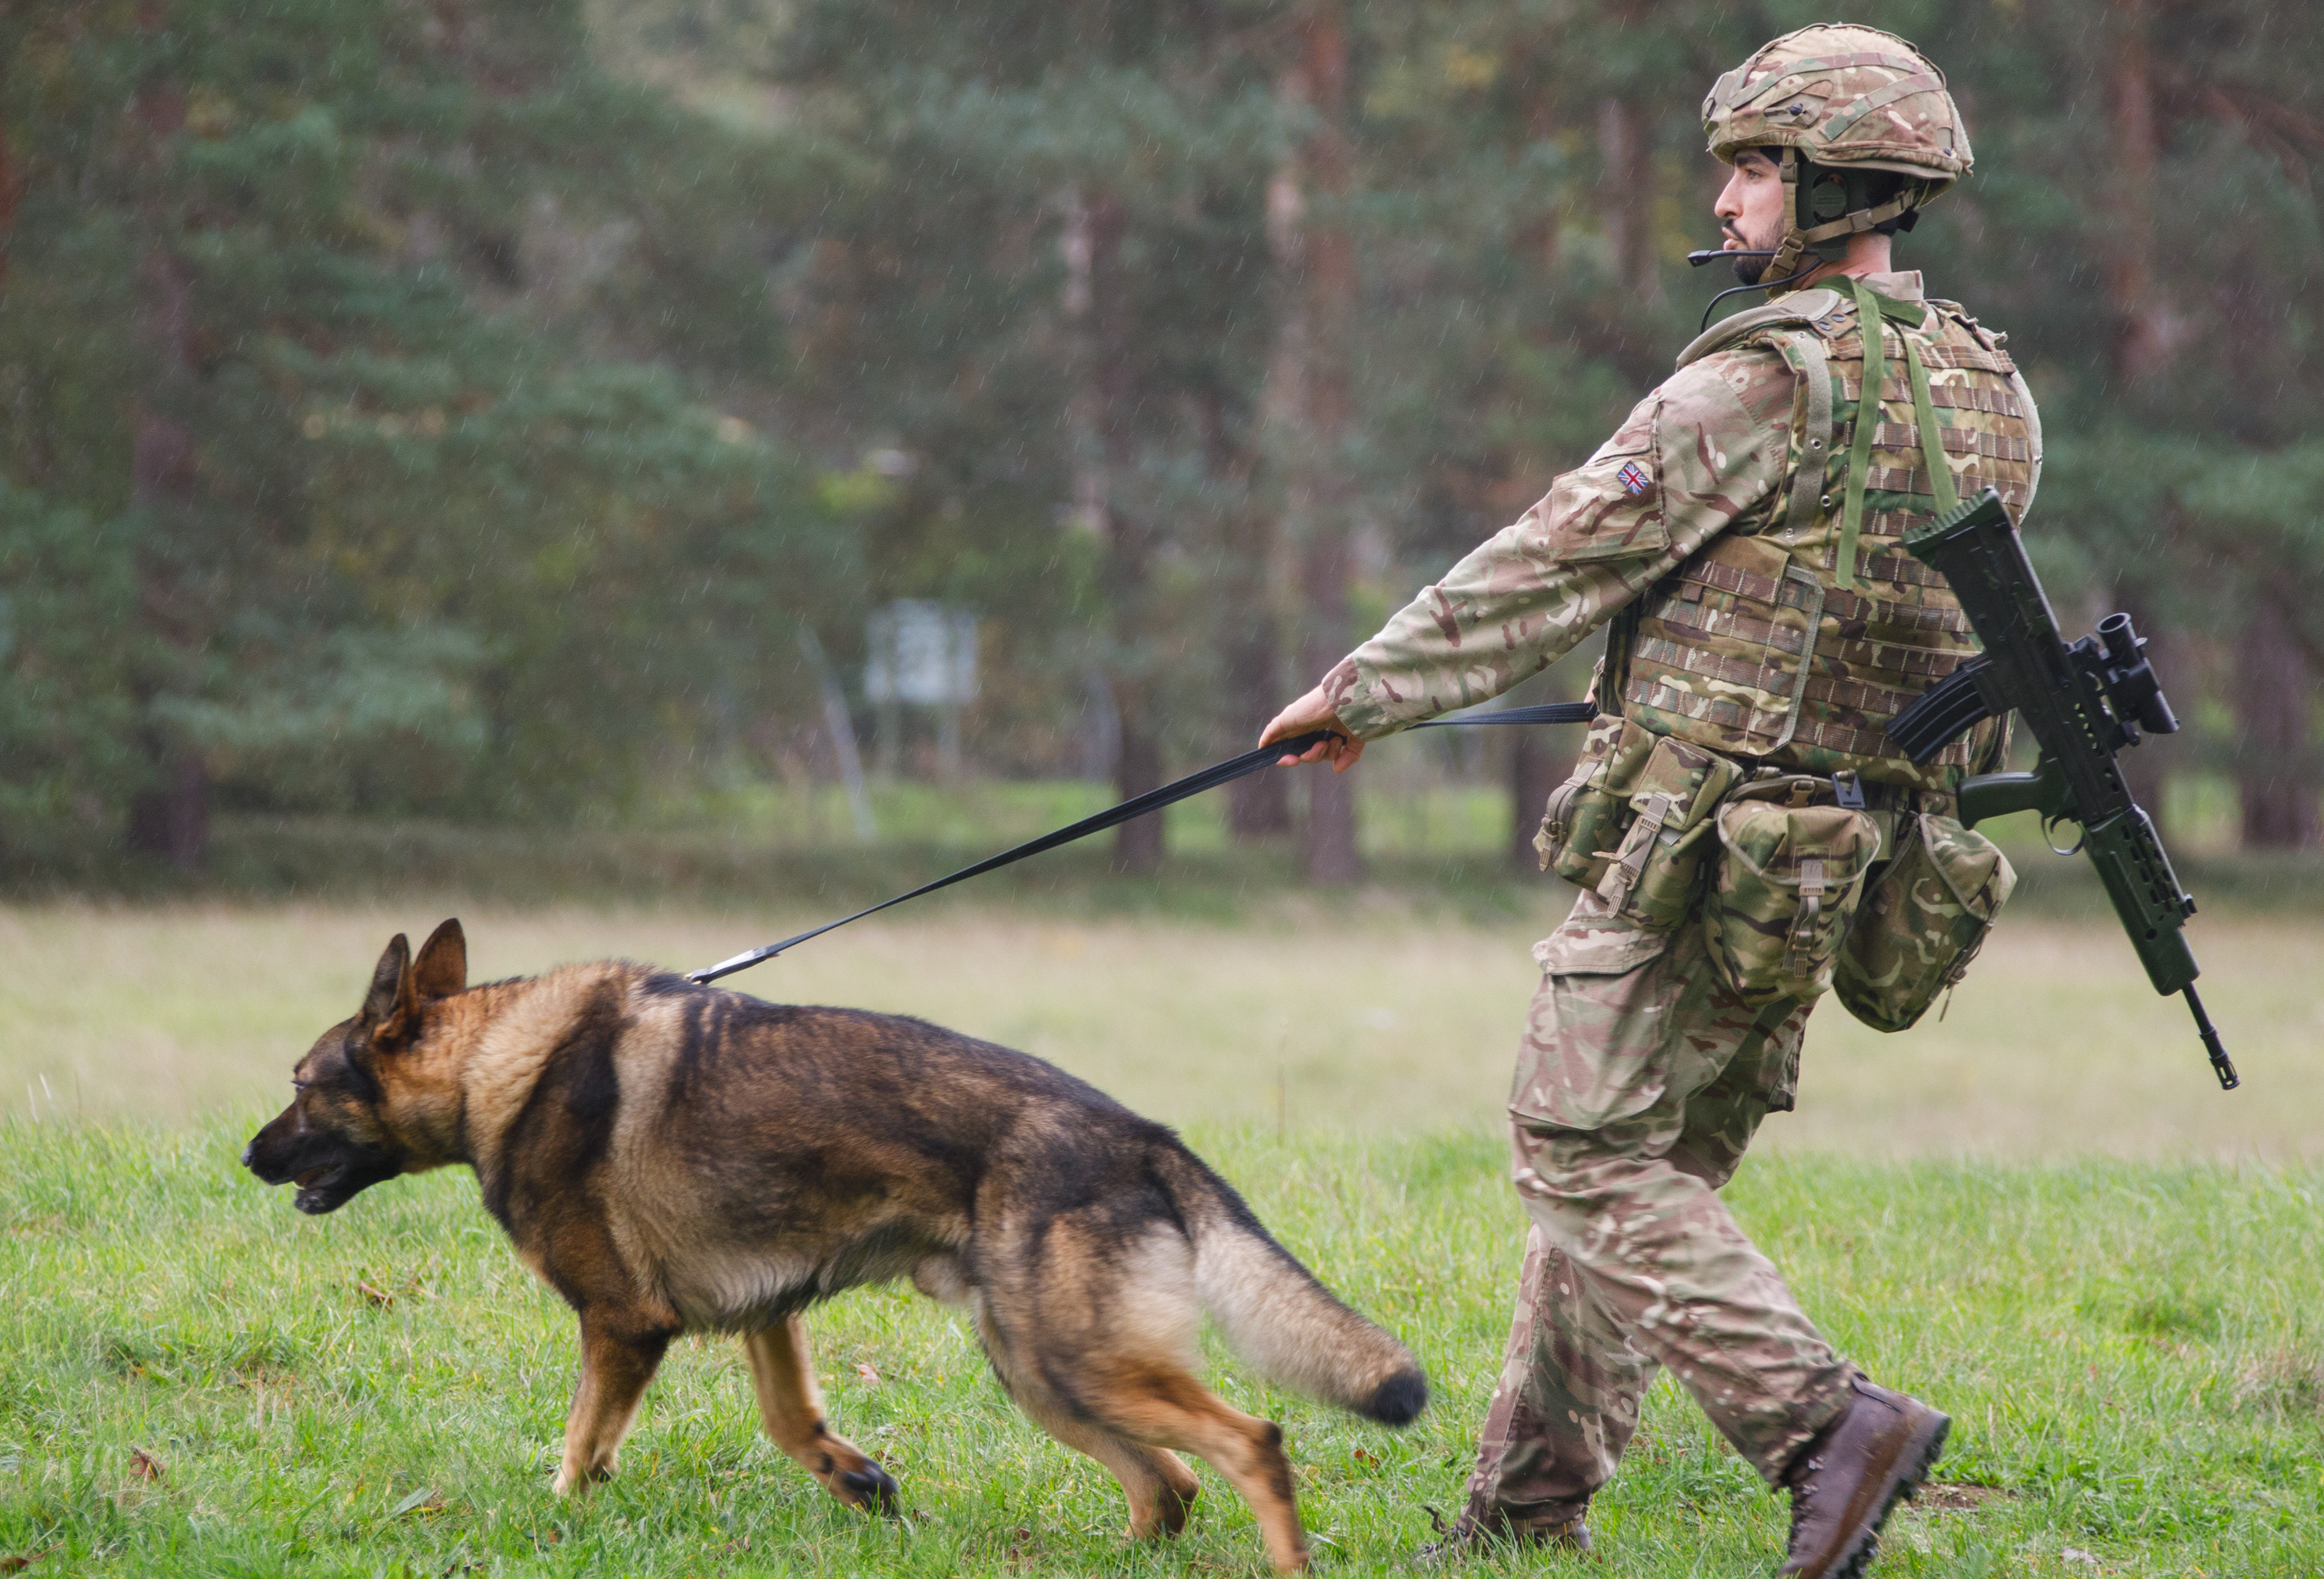 Dog conducting scent work, with Handler holding the leash